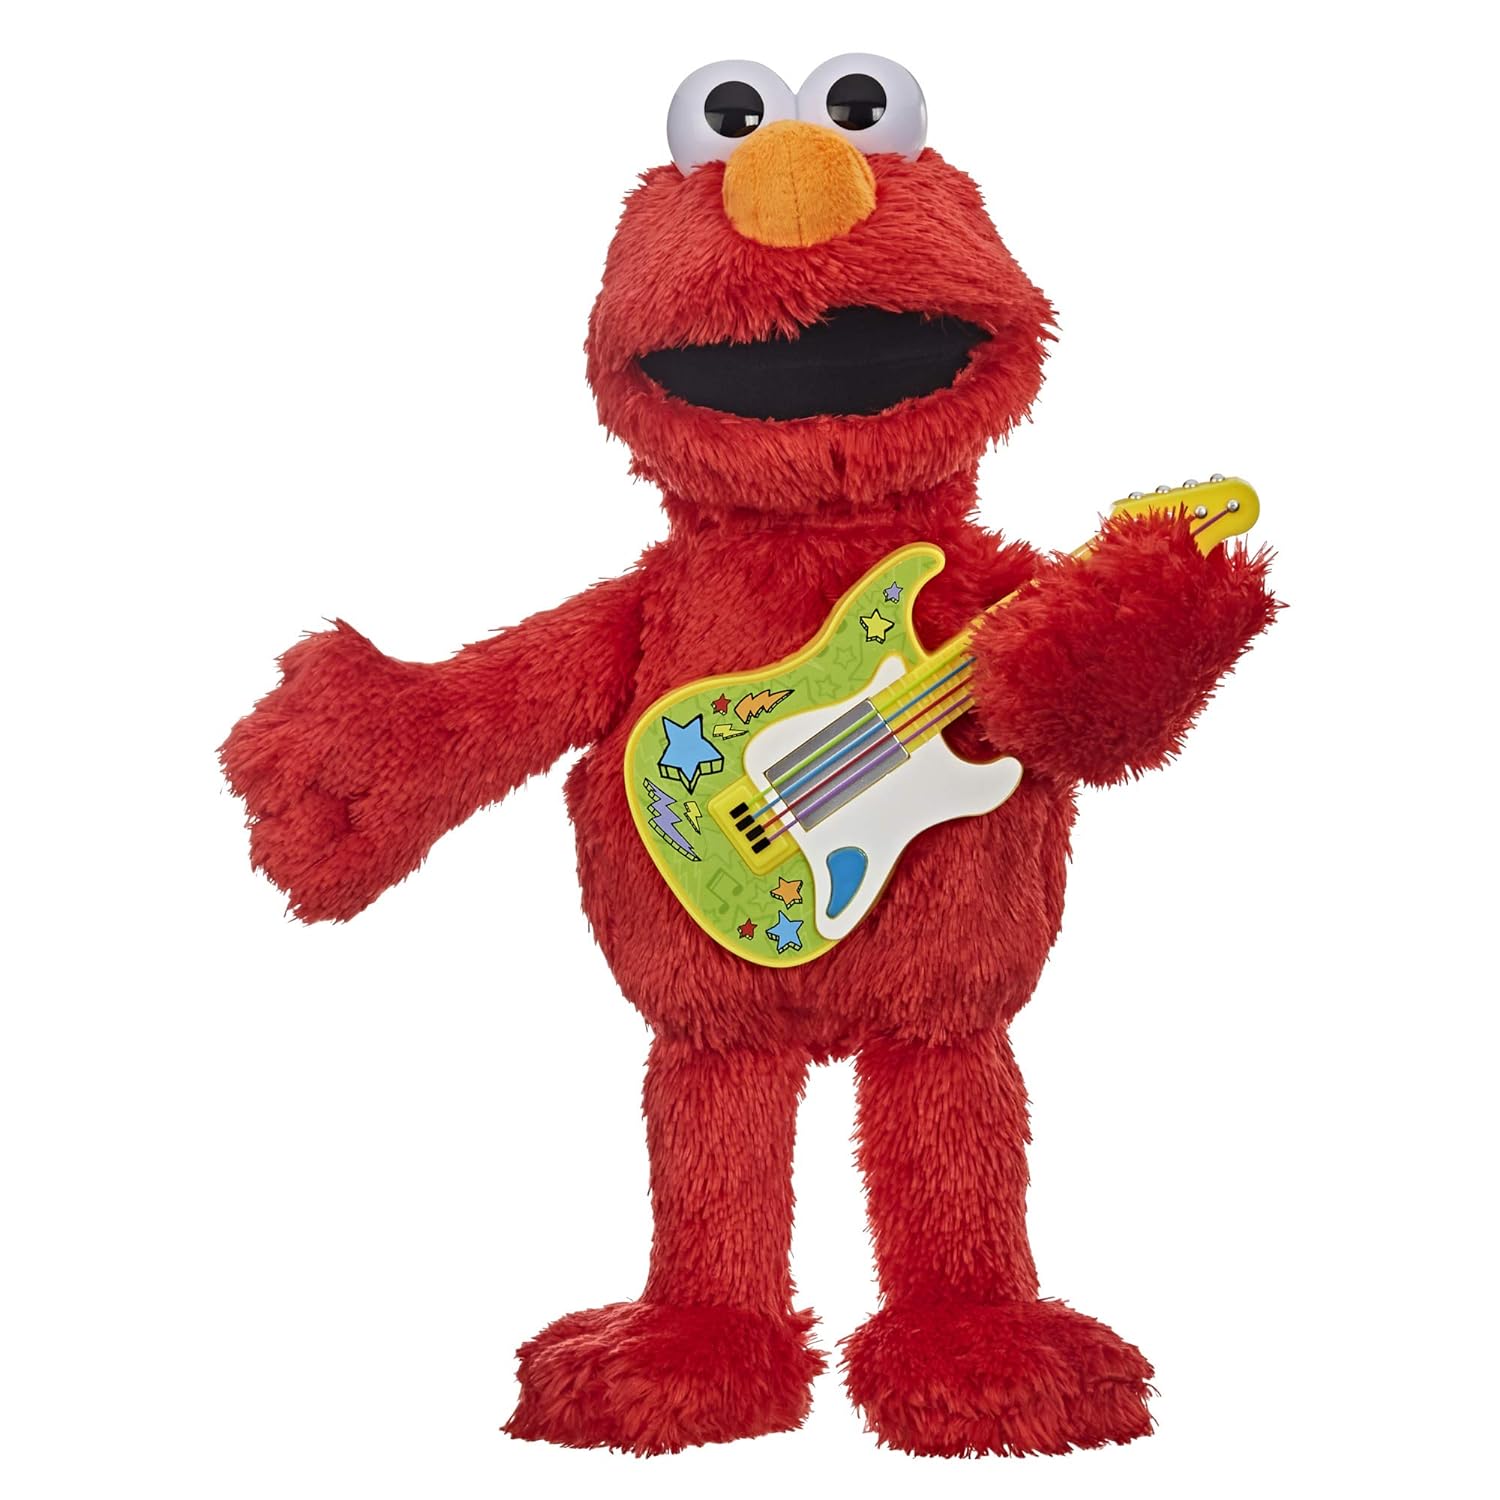 Hasbro Sesame Street Rock and Rhyme Elmo Talking, Singing 14-Inch Plush Toy for Toddlers, Kids 18 Months & Up